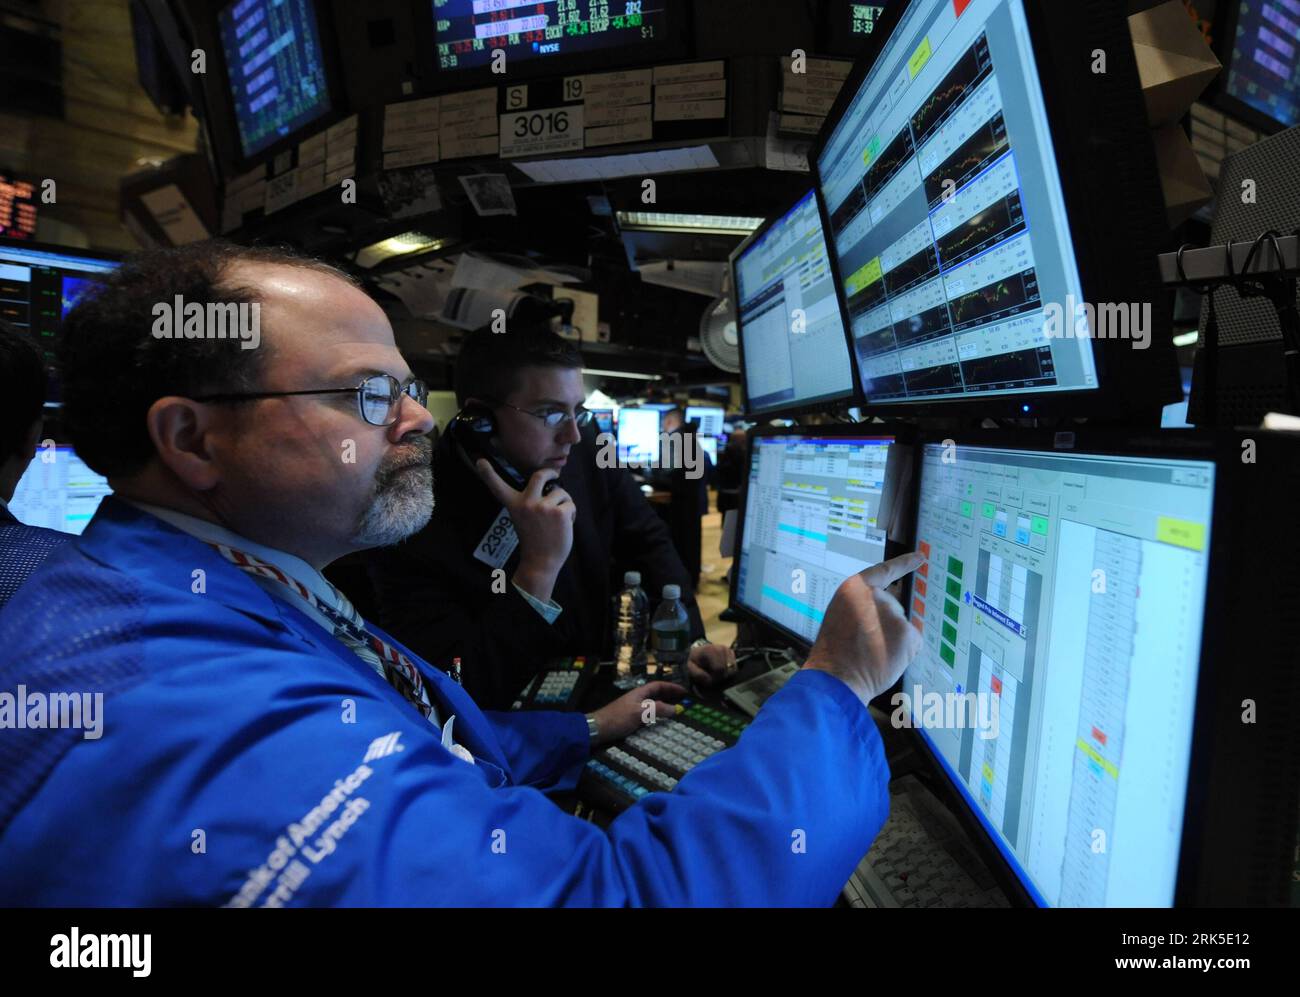 Bildnummer: 53745565  Datum: 22.01.2010  Copyright: imago/Xinhua  Traders work in the New York Stock Exchange, U.S., Jan. 22, 2010. Wall Street tumbled for the third straight session on Friday, with major averages ending down more than 2 percent, as investors were worried that s proposals of putting new restrictions on big banks could hurt economic recovery. The Dow Jones Industrial Average sank 216.9 points, or 2.09 percent, to 10,172.98. It s the Dow s first close below 10,200 since November. The Standard & Poor s 500 index fell 24.72, or 2.21 percent, to 1,091.76 and the Nasdaq tumbled 60.4 Stock Photo